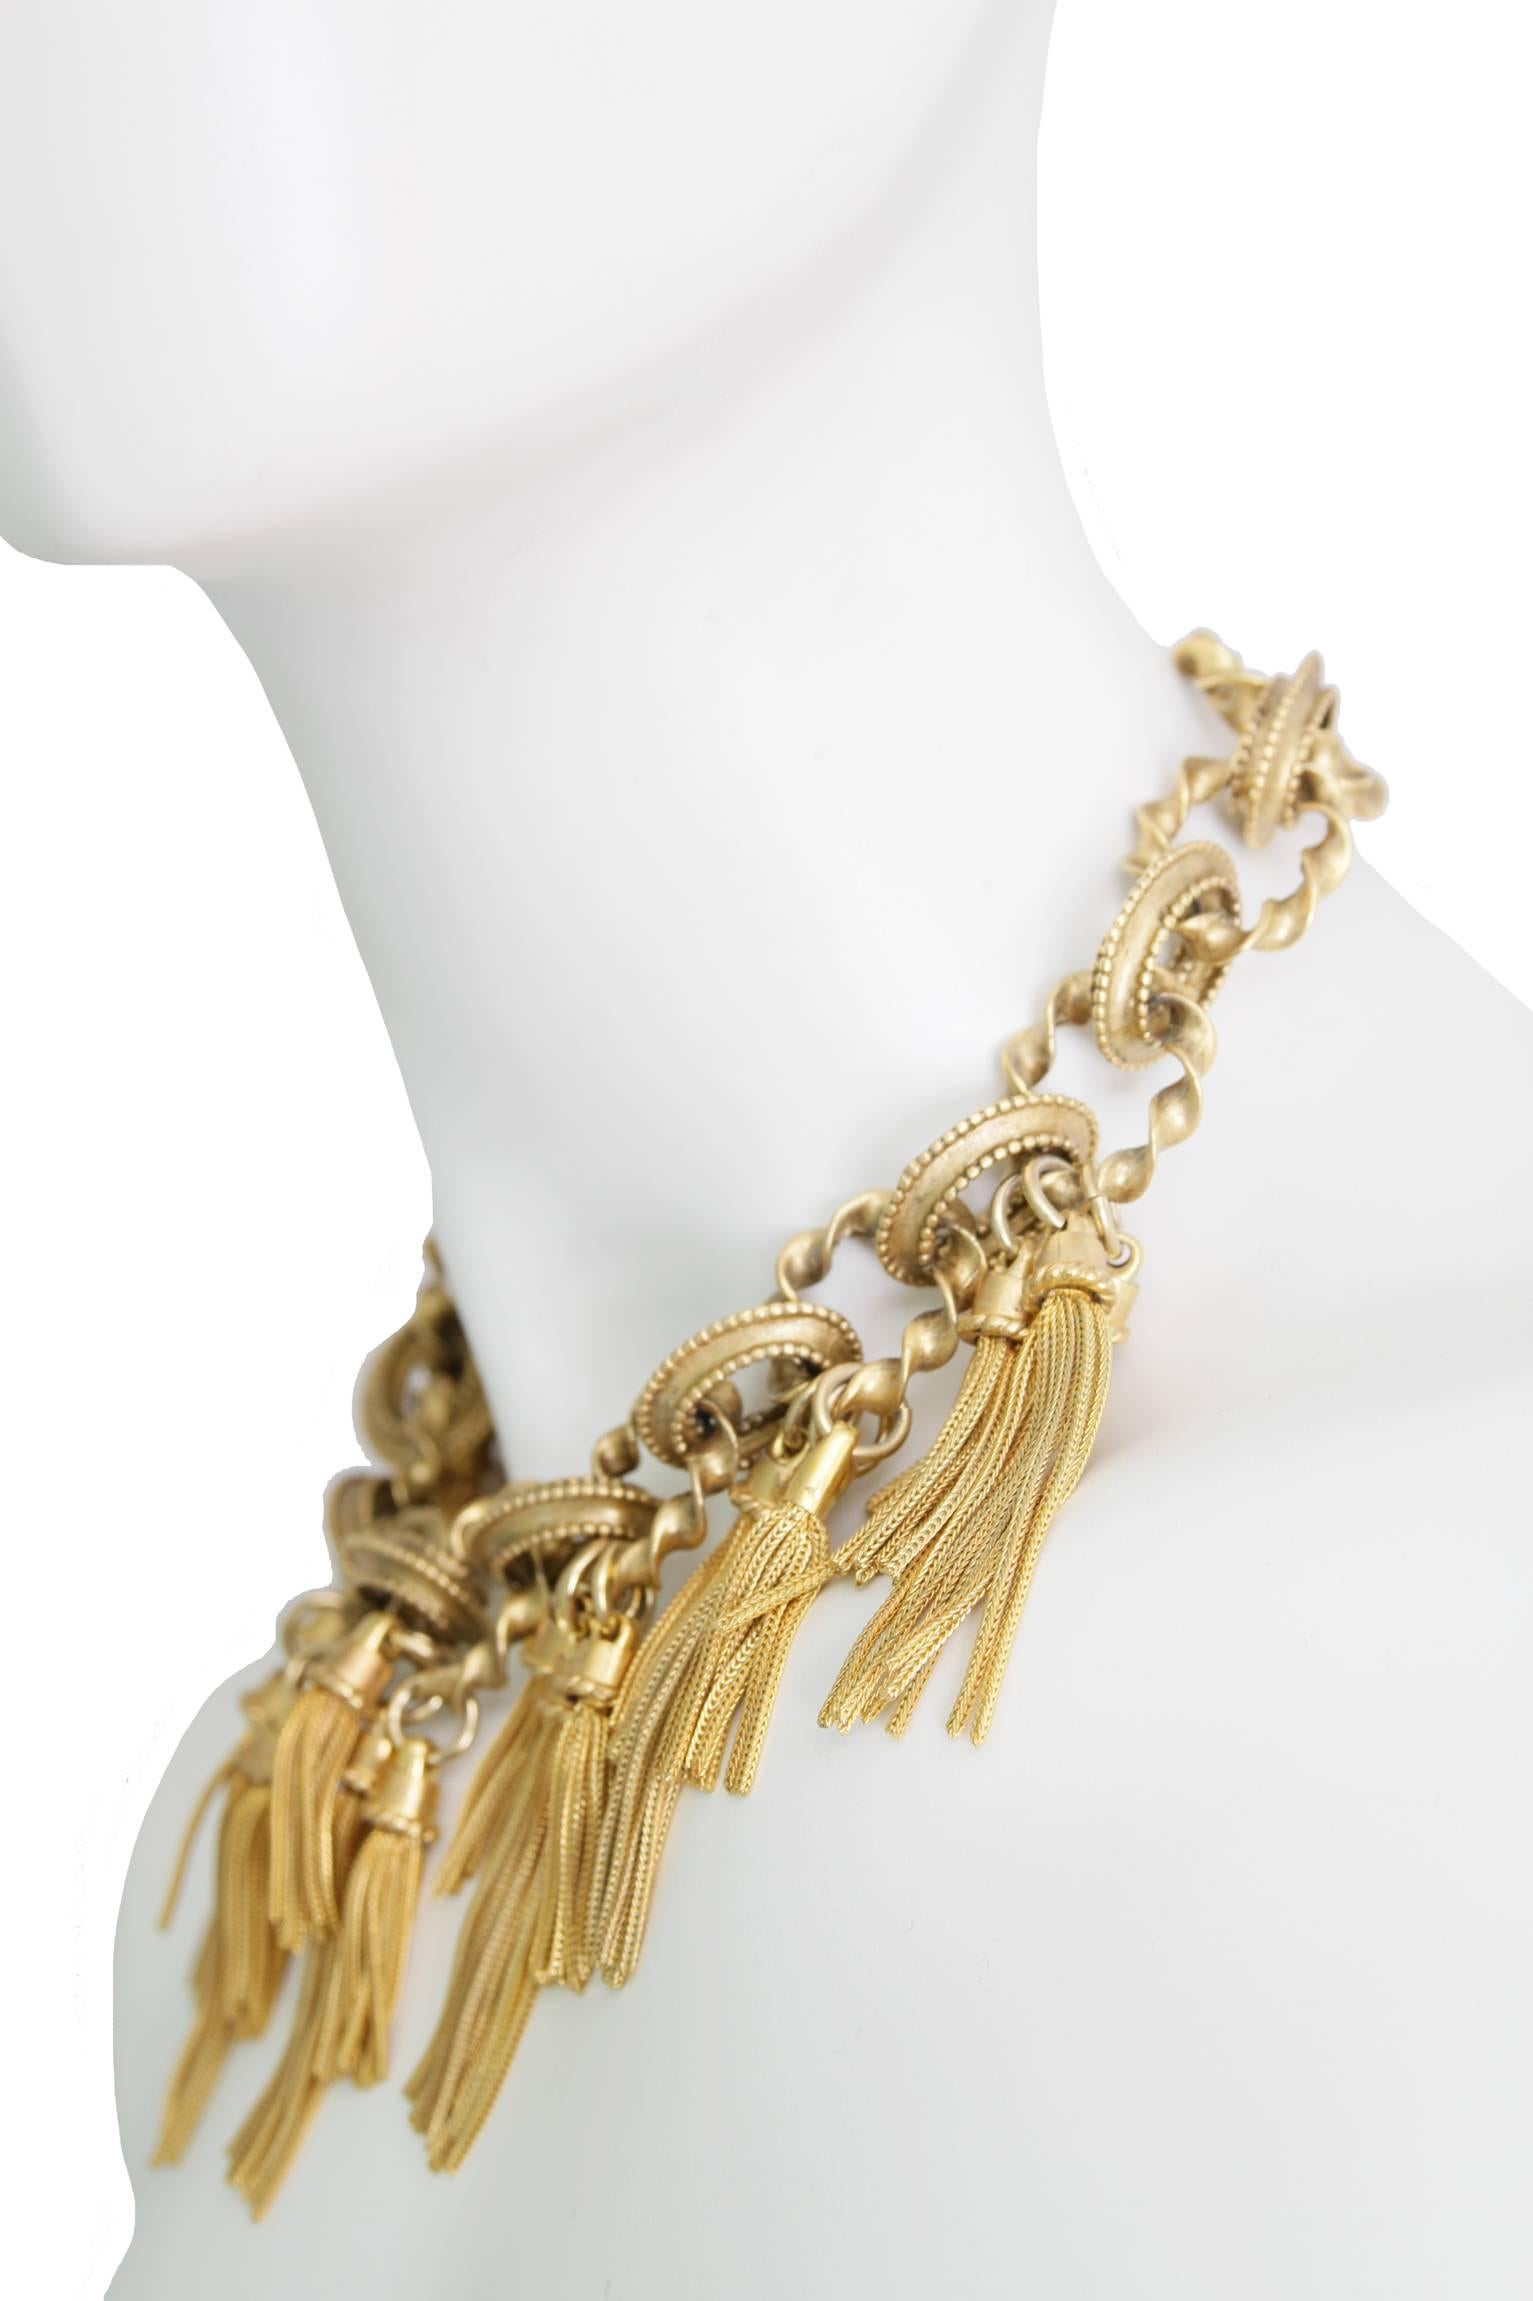 A 1980s gold toned Karl Lagerfeld oversize chain link necklace with large gold-toned tassel embellishment hanging from every other link in the center front. The tassels hang in clusters of three with each middle one being slightly longer. The